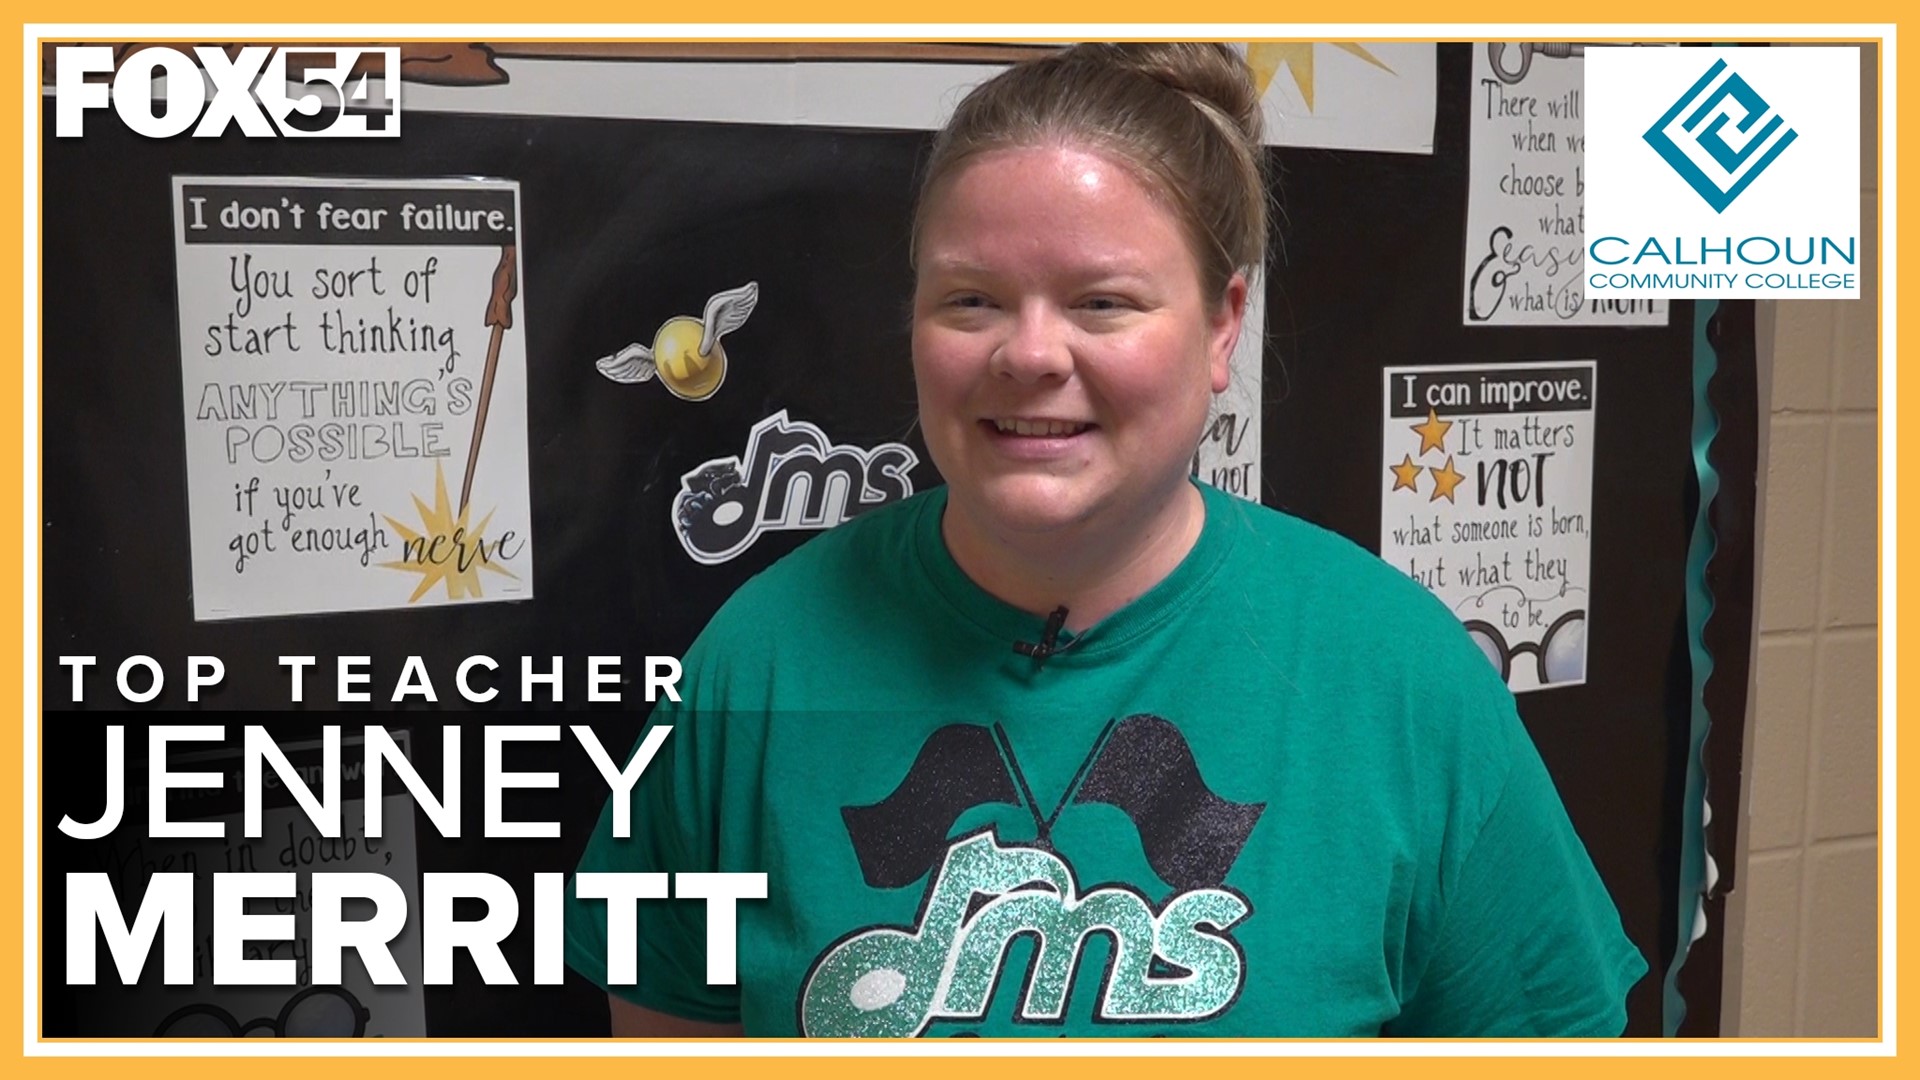 Here's our Valley's Top Teacher from Discovery Middle School, Jenney Merritt!